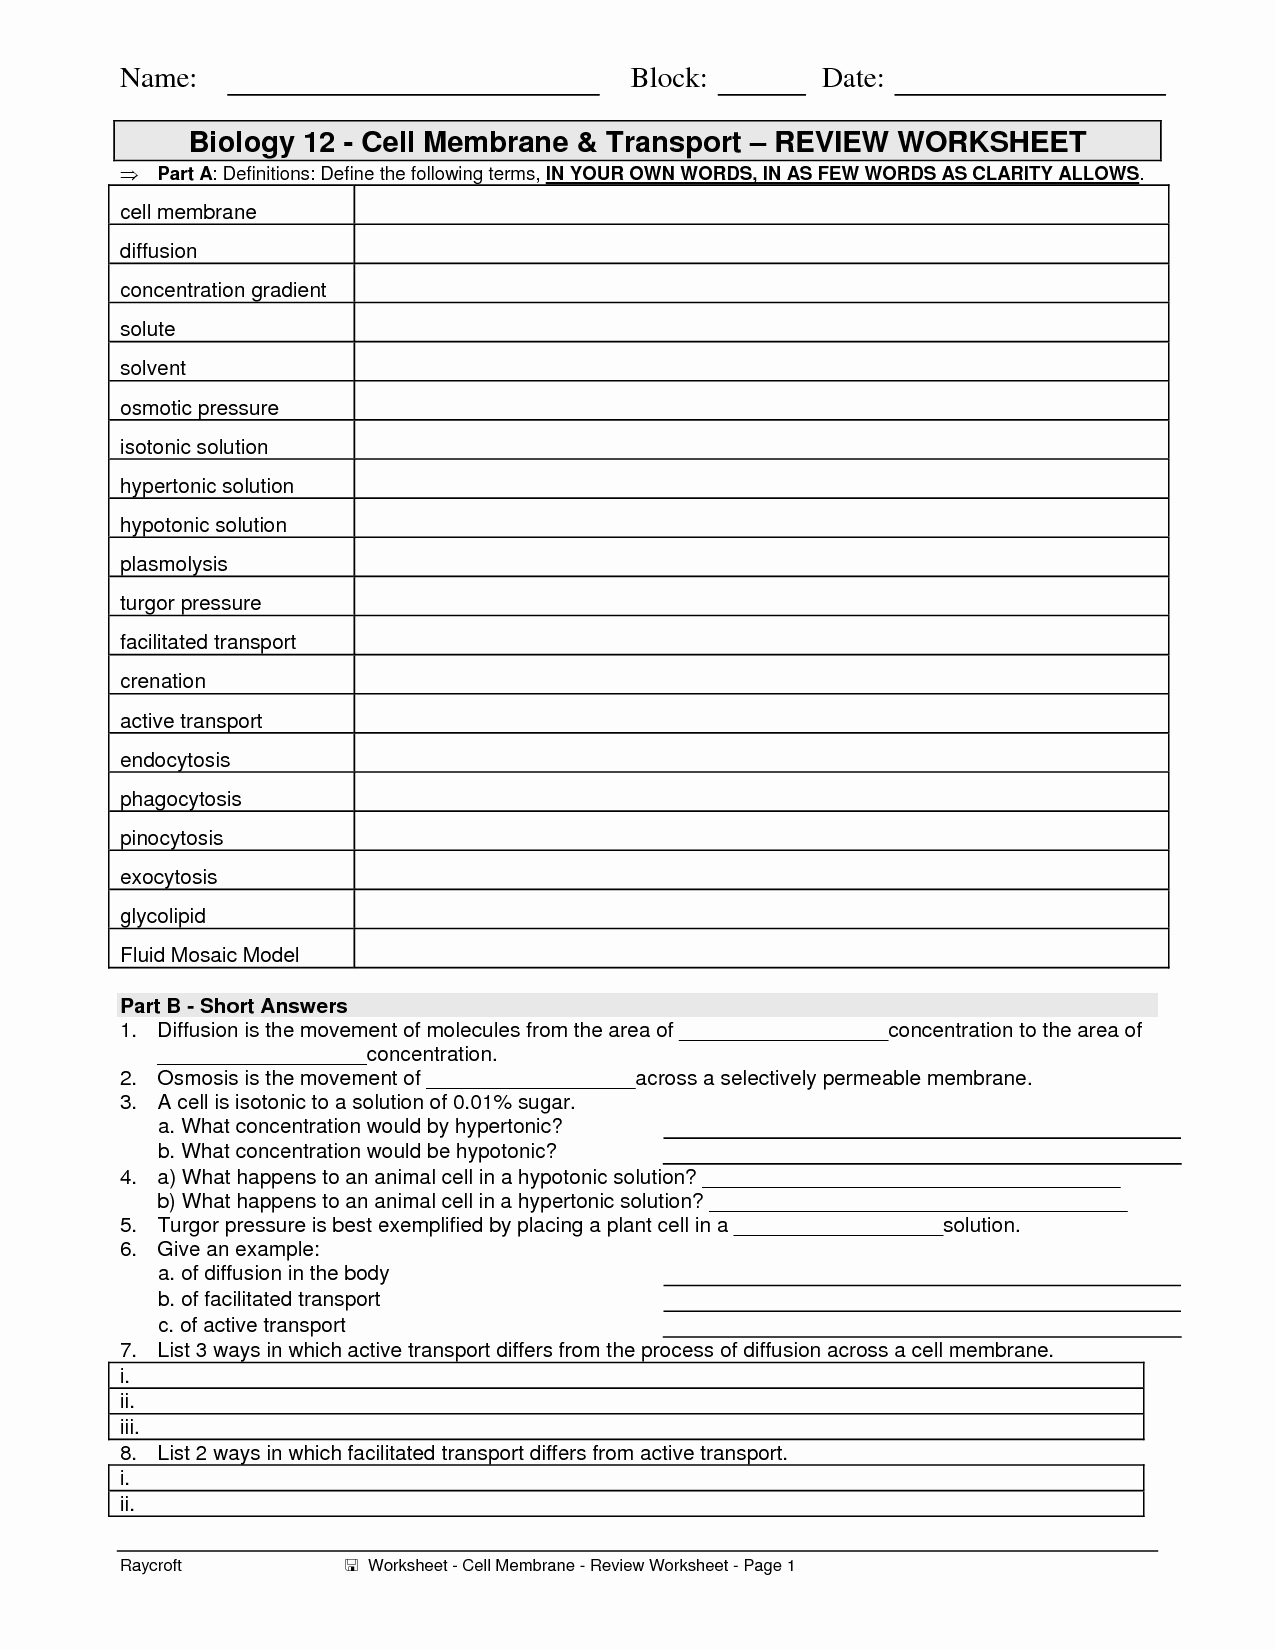 Passive Transport Worksheet Answers Awesome 43 Passive and Active Transport Worksheet Uncategorized